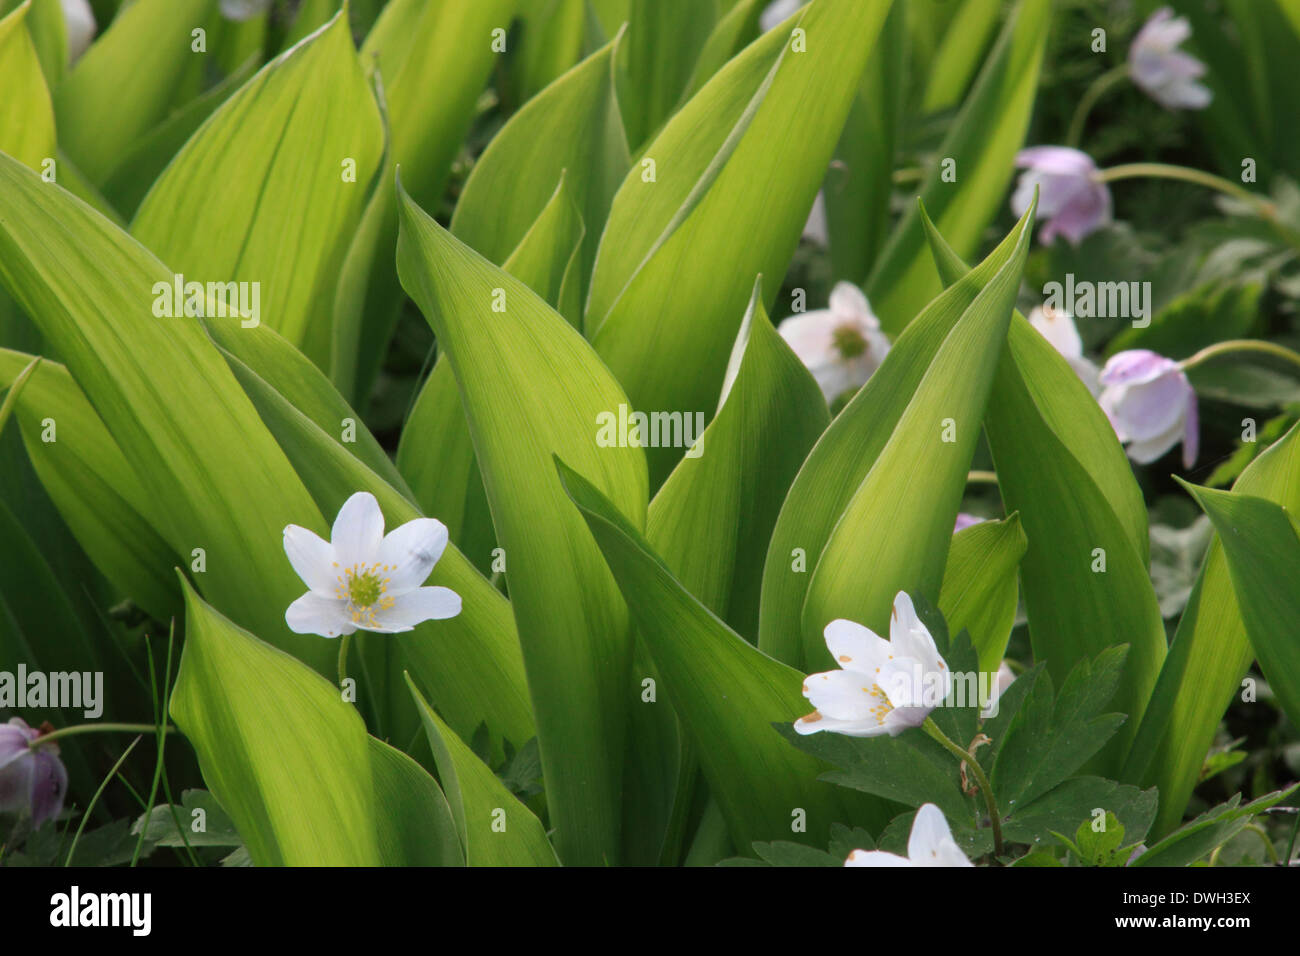 Wood anemone (Anemone nemorosa) flowering between the leaves of lily of the valley flowers (Convallaria majalis) in springtime. Stock Photo